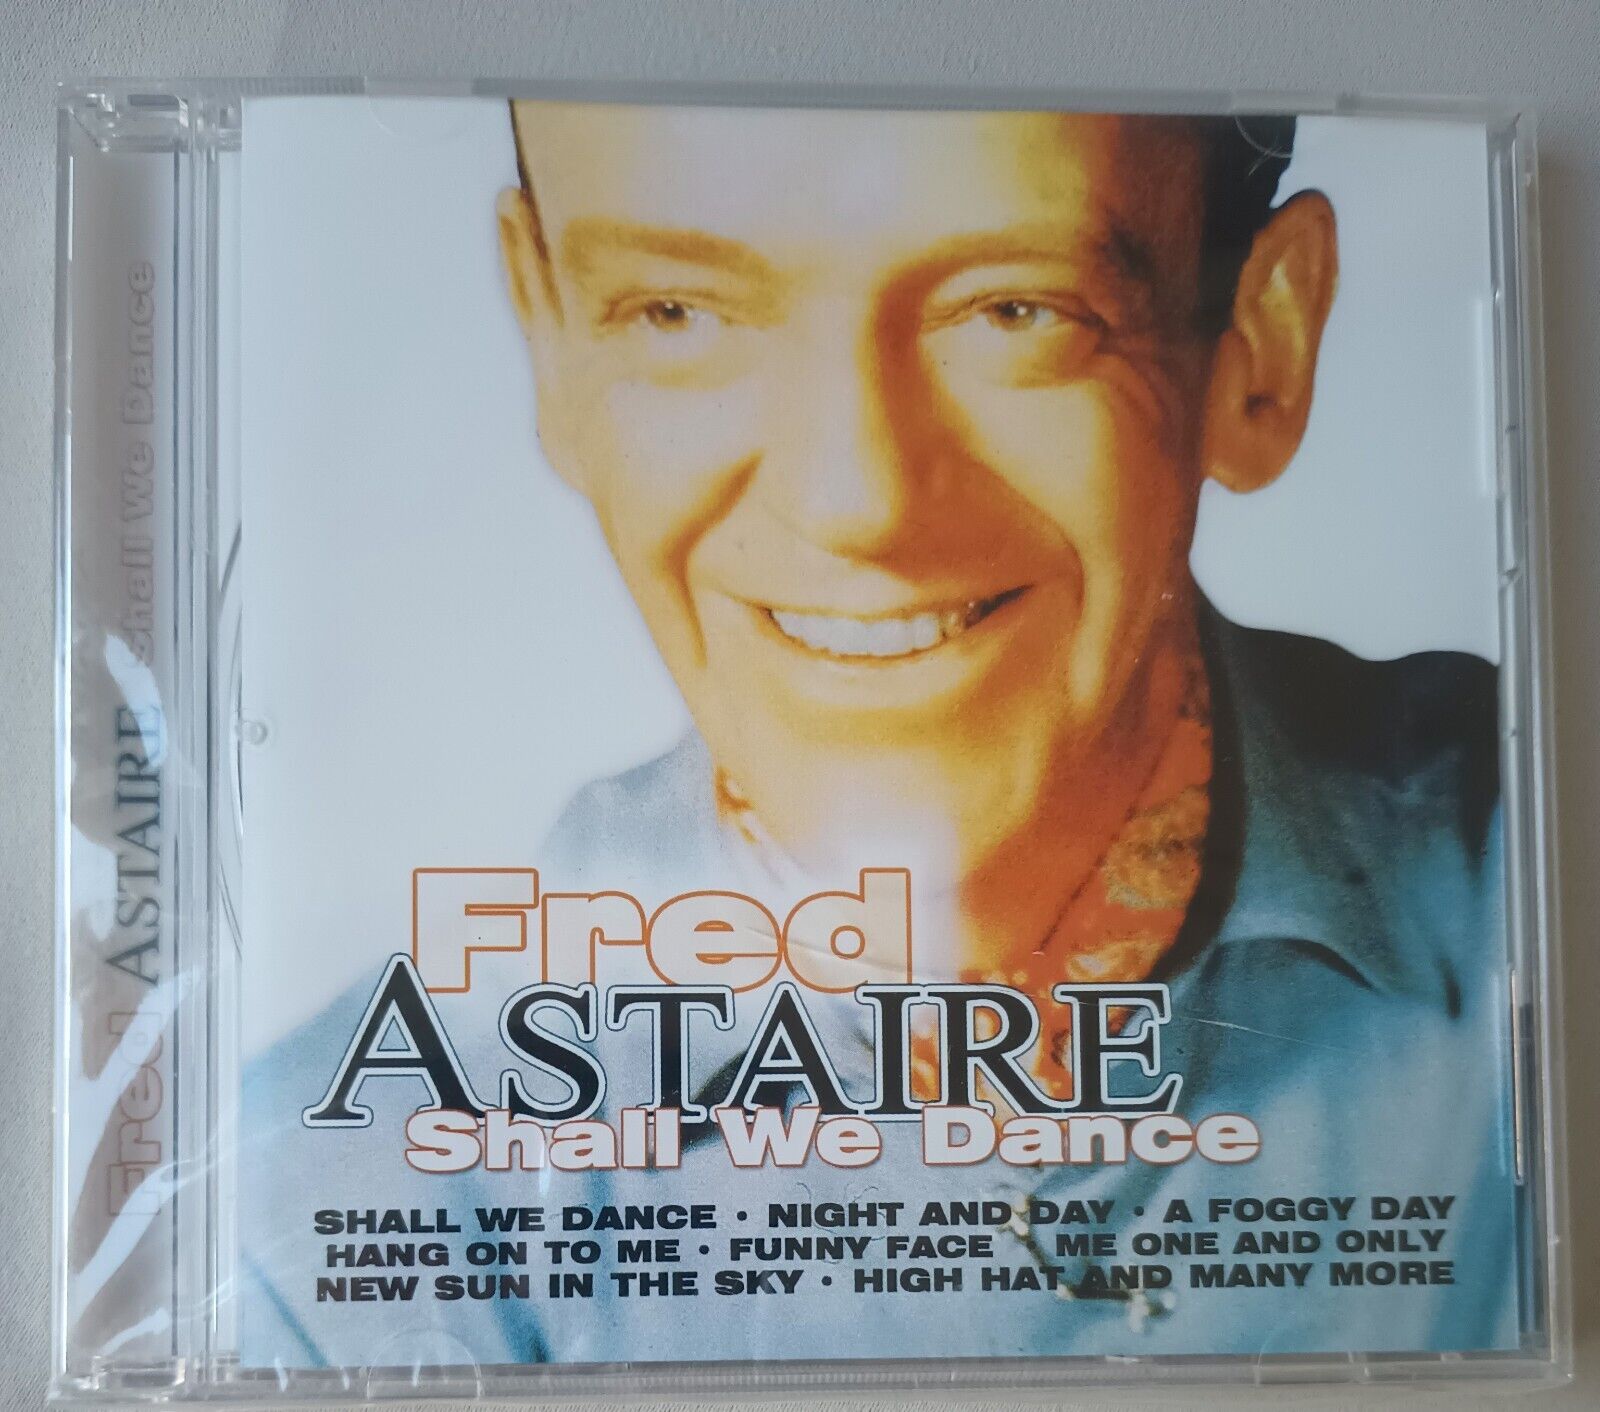 Fred Astaire Shall We Dance NEW CD Sealed 2001 Vintage Musicbank 16 Tracks